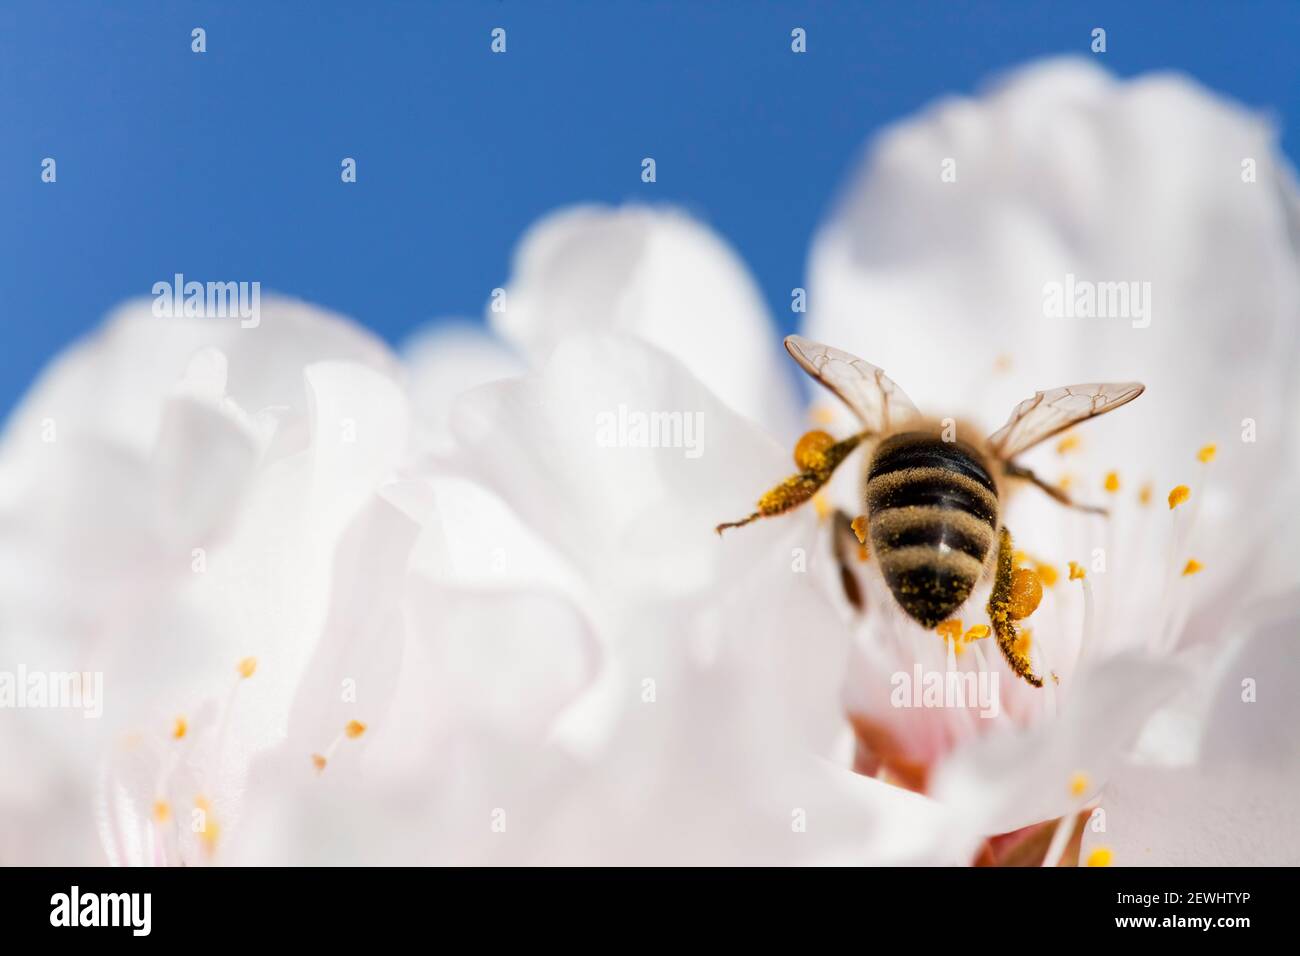 Bee in white blossom of almond tree in spring with blue sky in the background Stock Photo